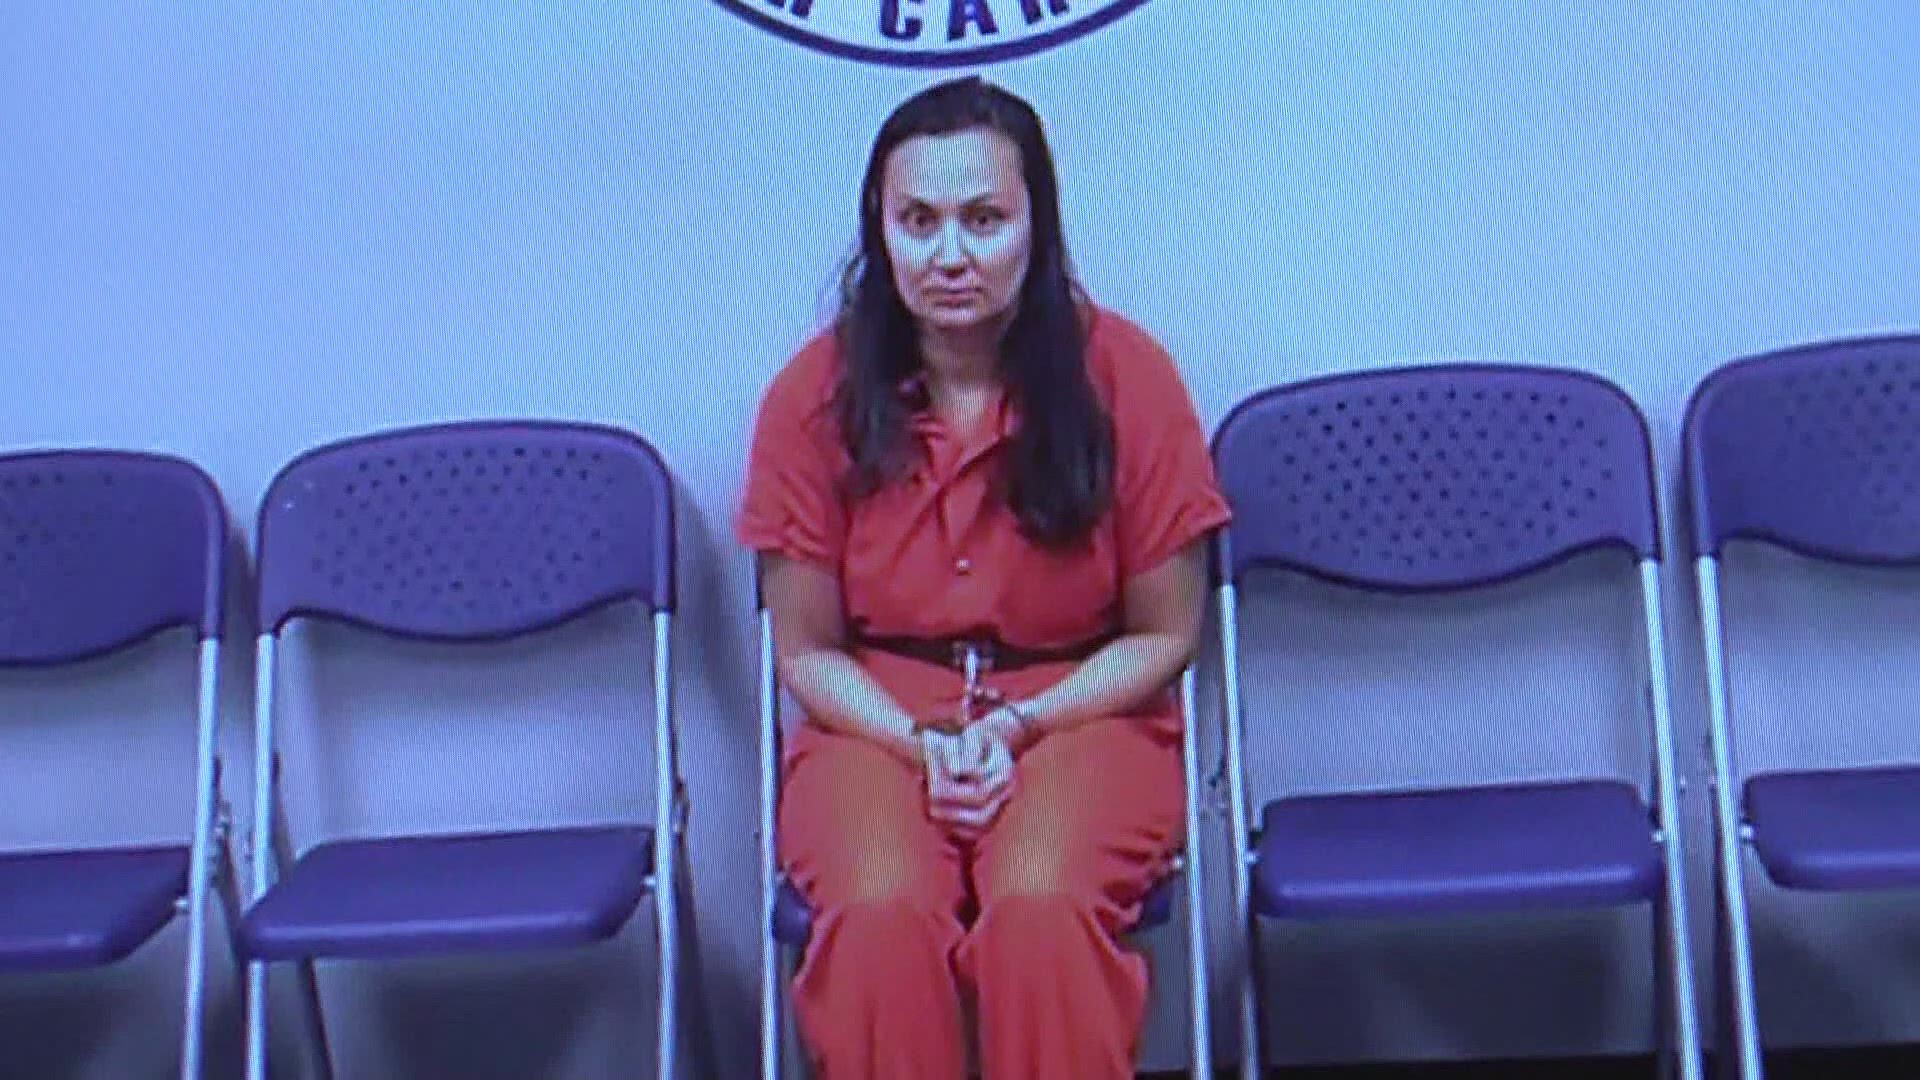 Letecia Stauch, who is accused of killing her 11-year-old stepson Gannon Stauch, appeared in court Tuesday morning in Myrtle Beach, South Carolina.